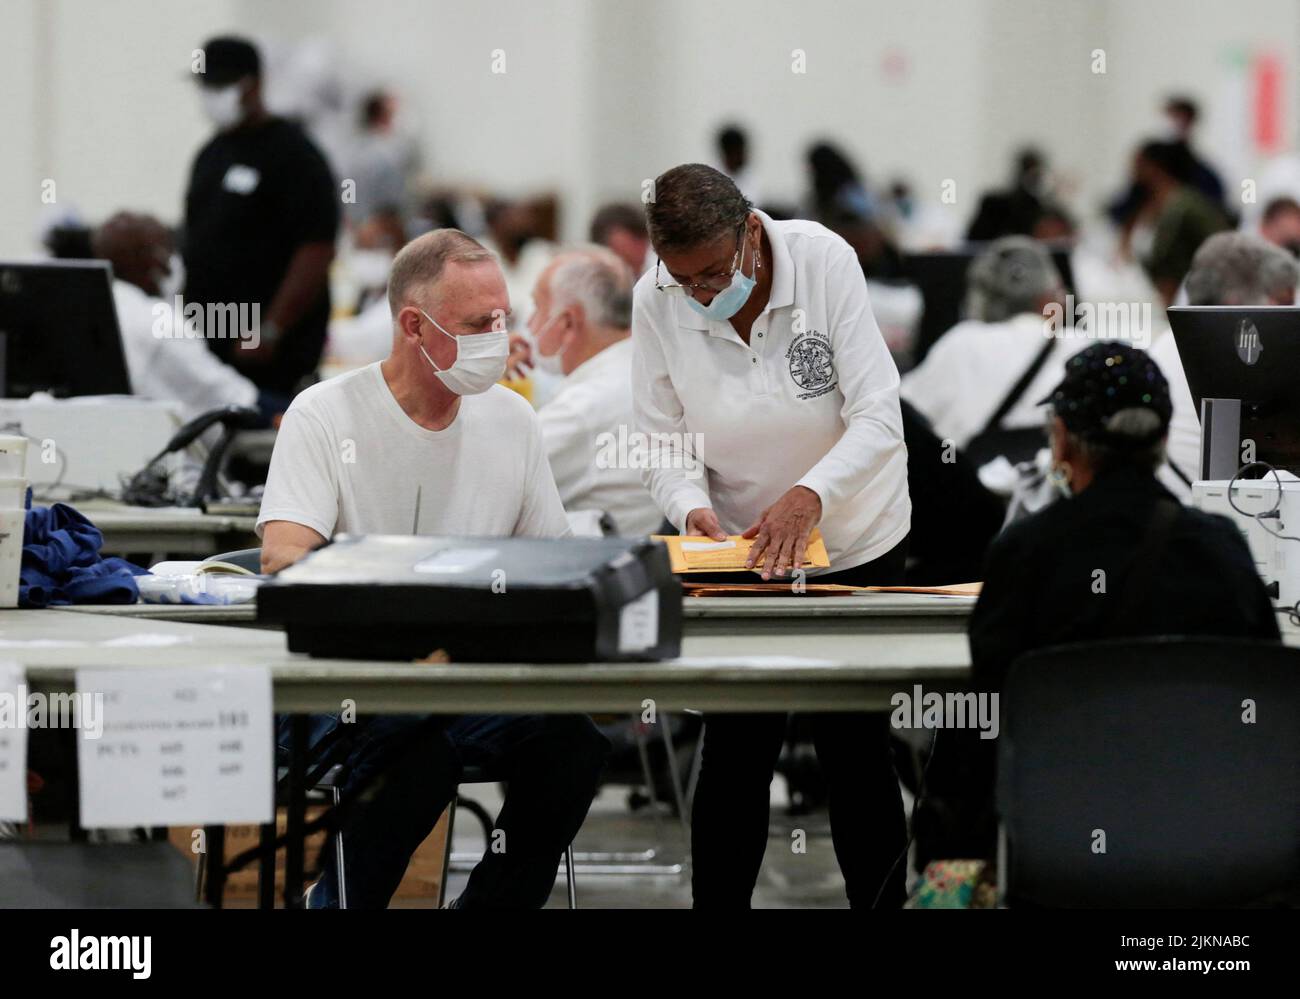 Election workers prepare absentee ballots for counting at Huntington Place during the primary election in Detroit, Michigan, U.S. August 2, 2022.  REUTERS/Rebecca Cook Stock Photo